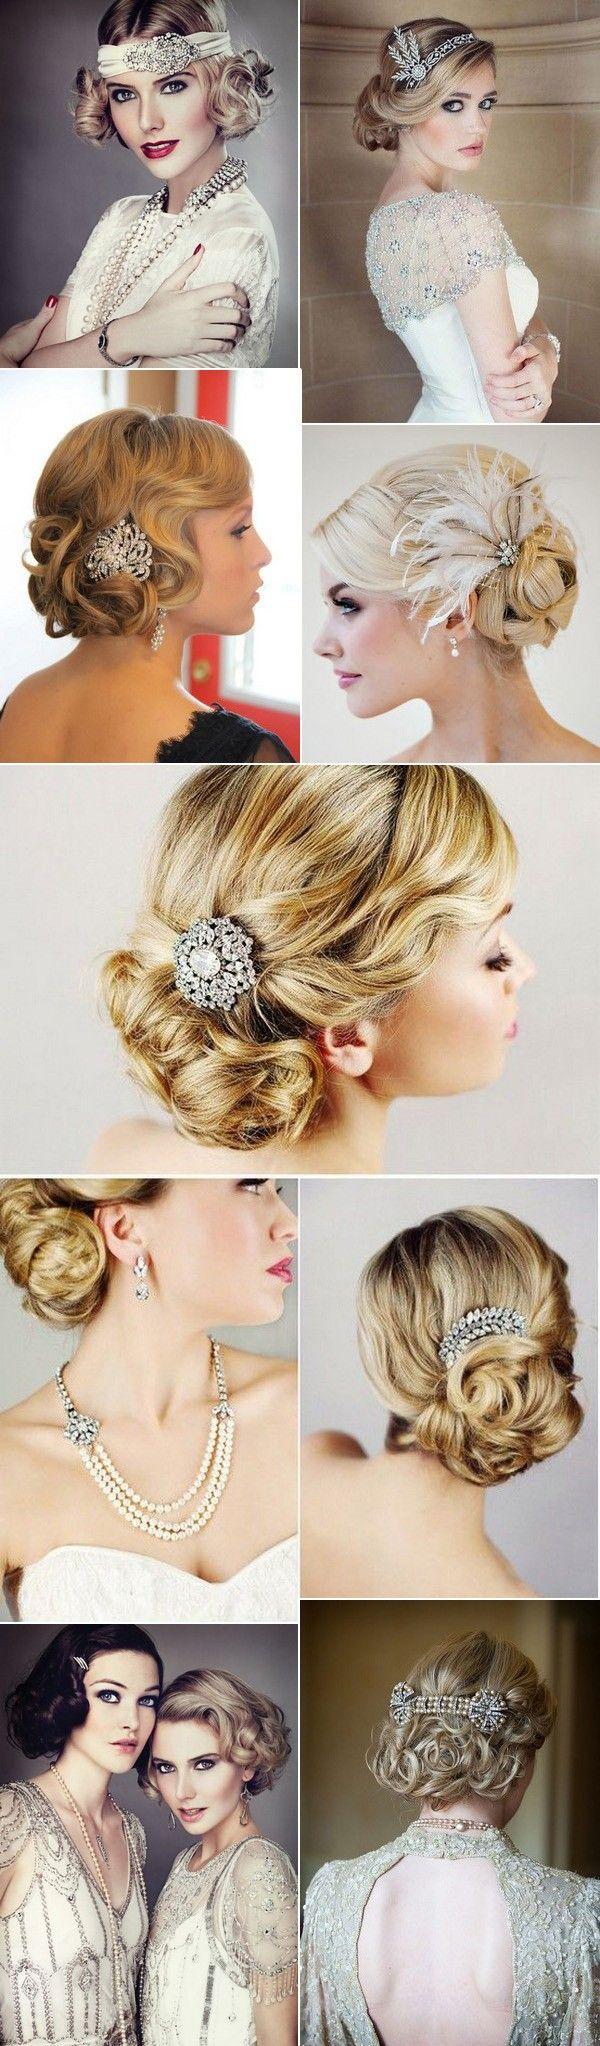 Hochzeit - 30 Great Gatsby Vintage Wedding Ideas For 2018 Trends - Page 2 Of 3